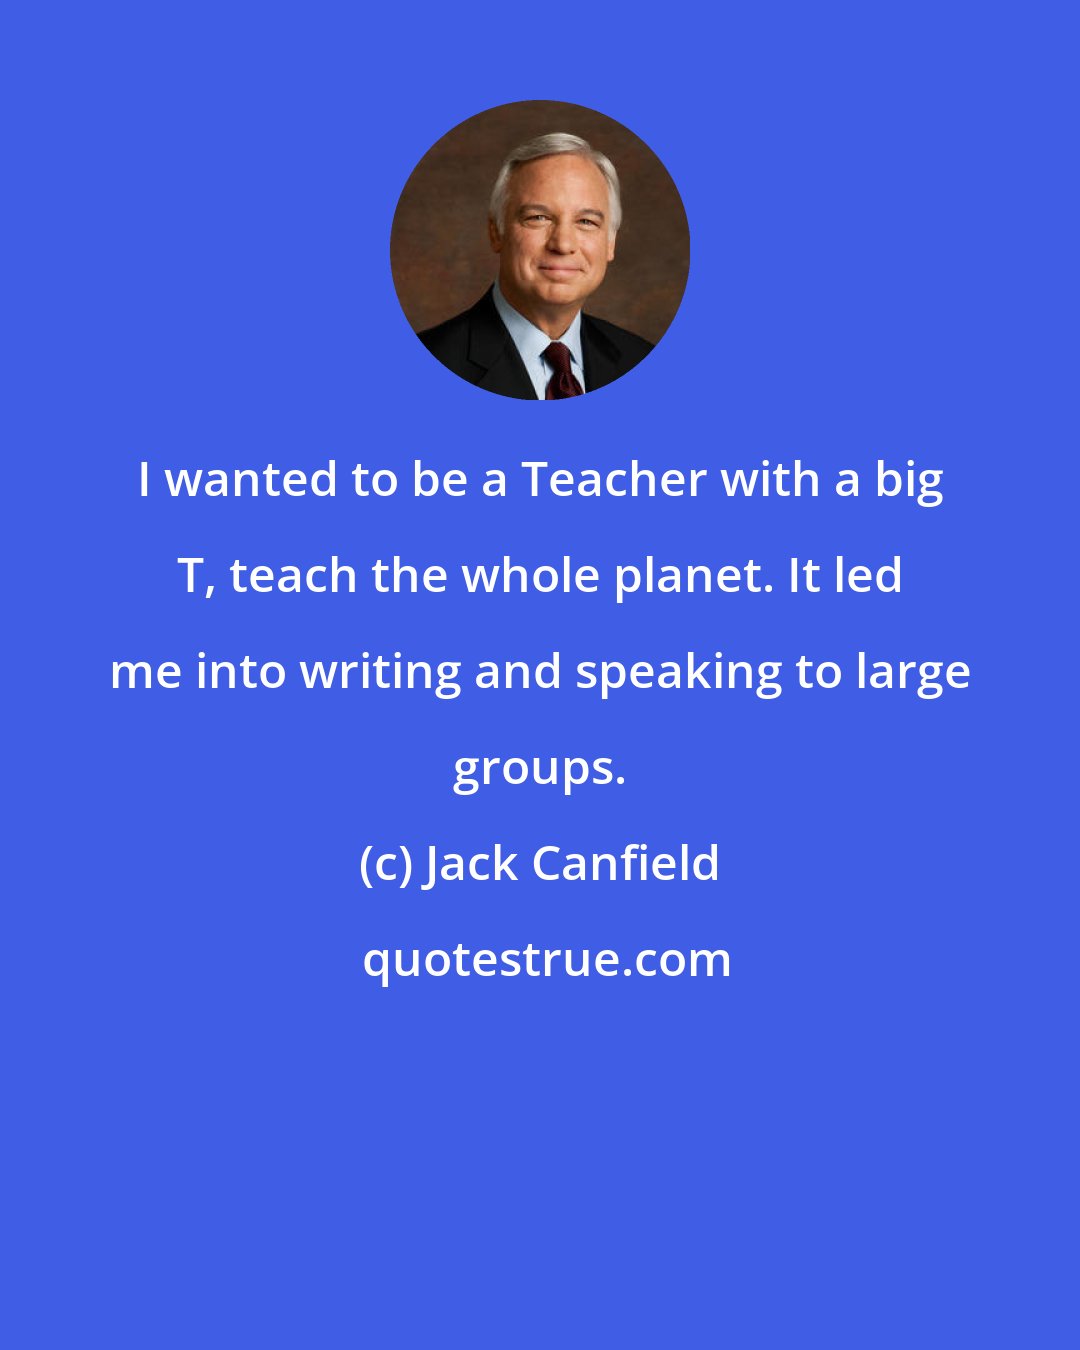 Jack Canfield: I wanted to be a Teacher with a big T, teach the whole planet. It led me into writing and speaking to large groups.